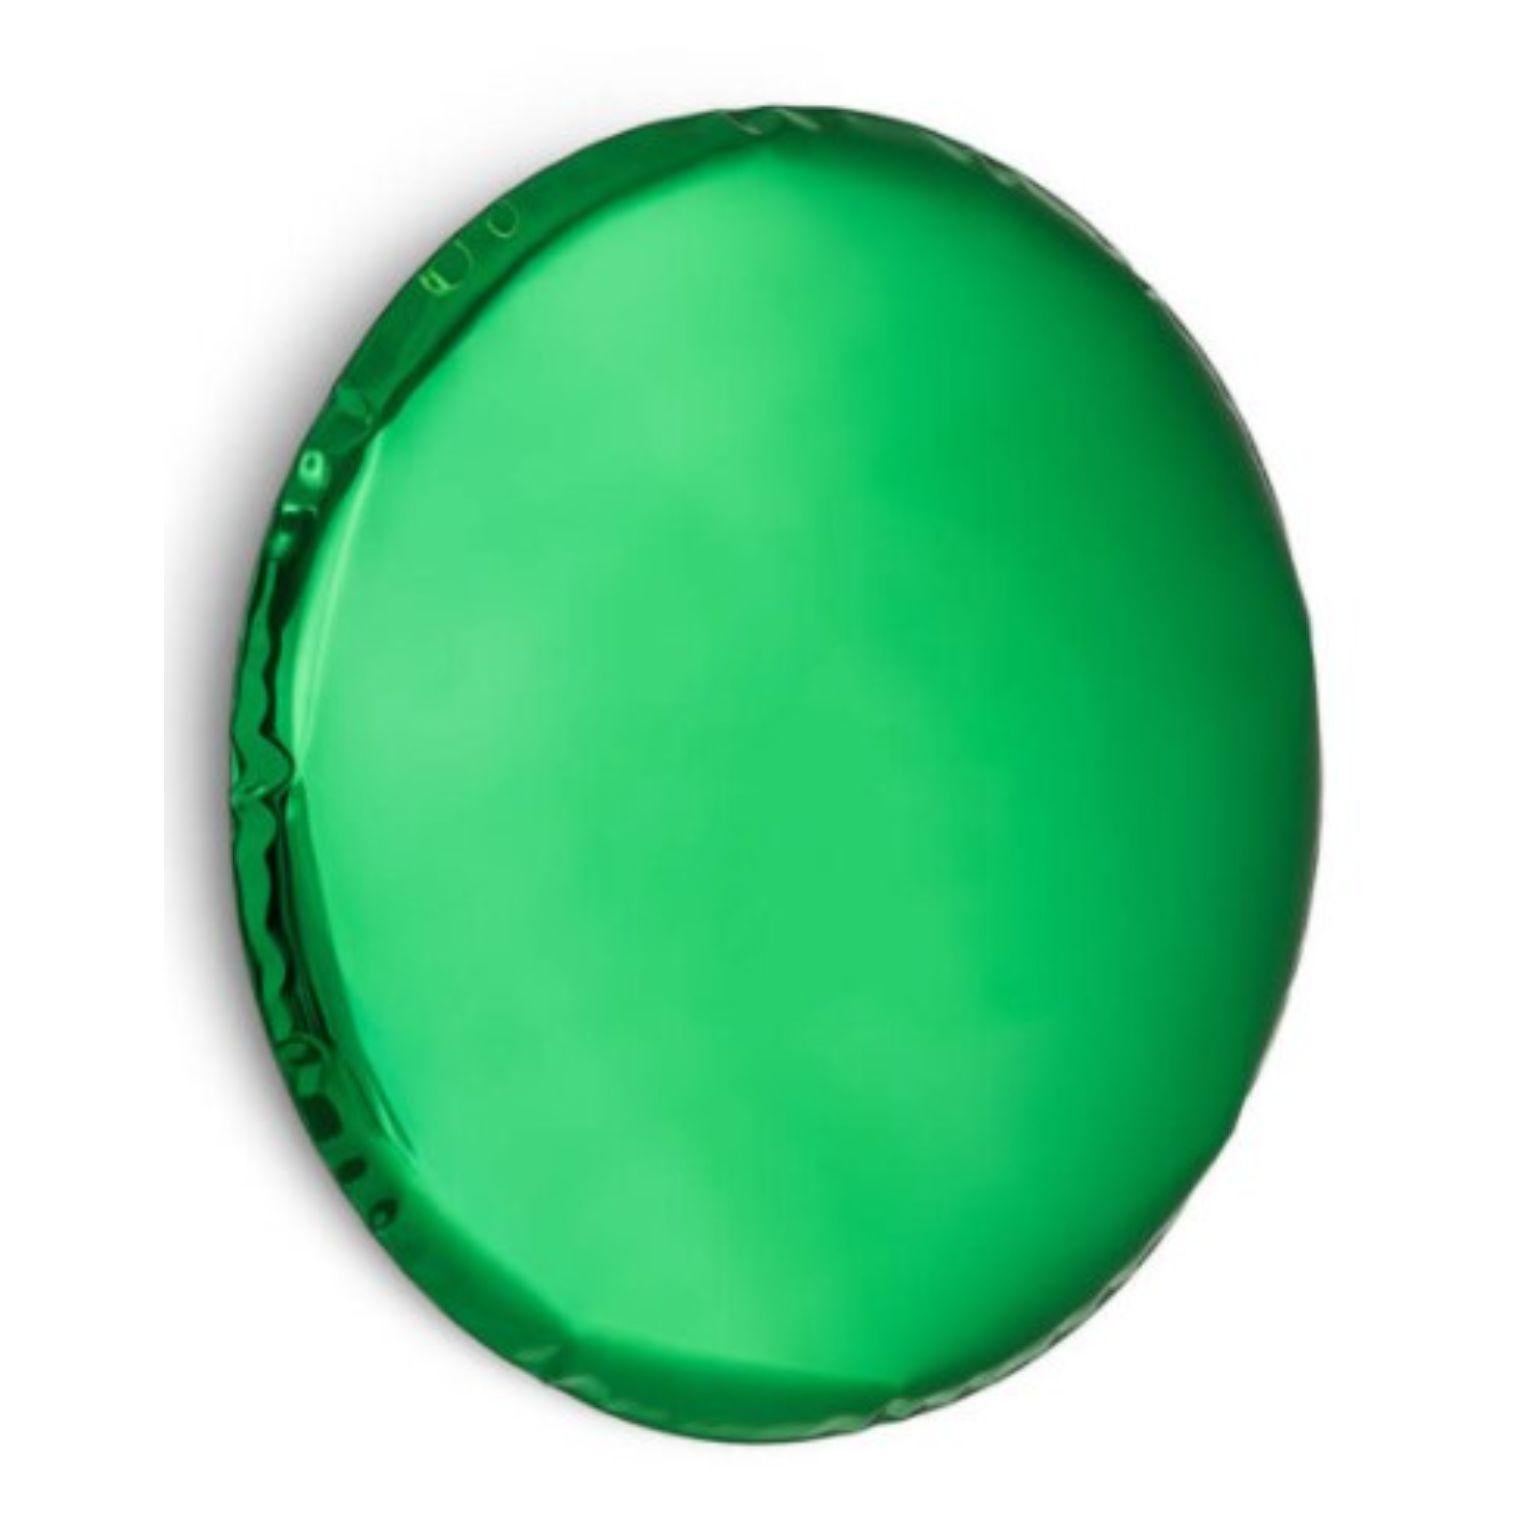 Emerald Oko 36 sculptural wall mirror by Zieta
Dimensions: Diameter 36 x D 6 cm 
Material: Stainless steel. 
Finish: Emerald.
Available in finishes: Stainless Steel, Deep Space Blue, Emerald, Sapphire, Sapphire/Emerald, Dark Matter, and Red Rubin.